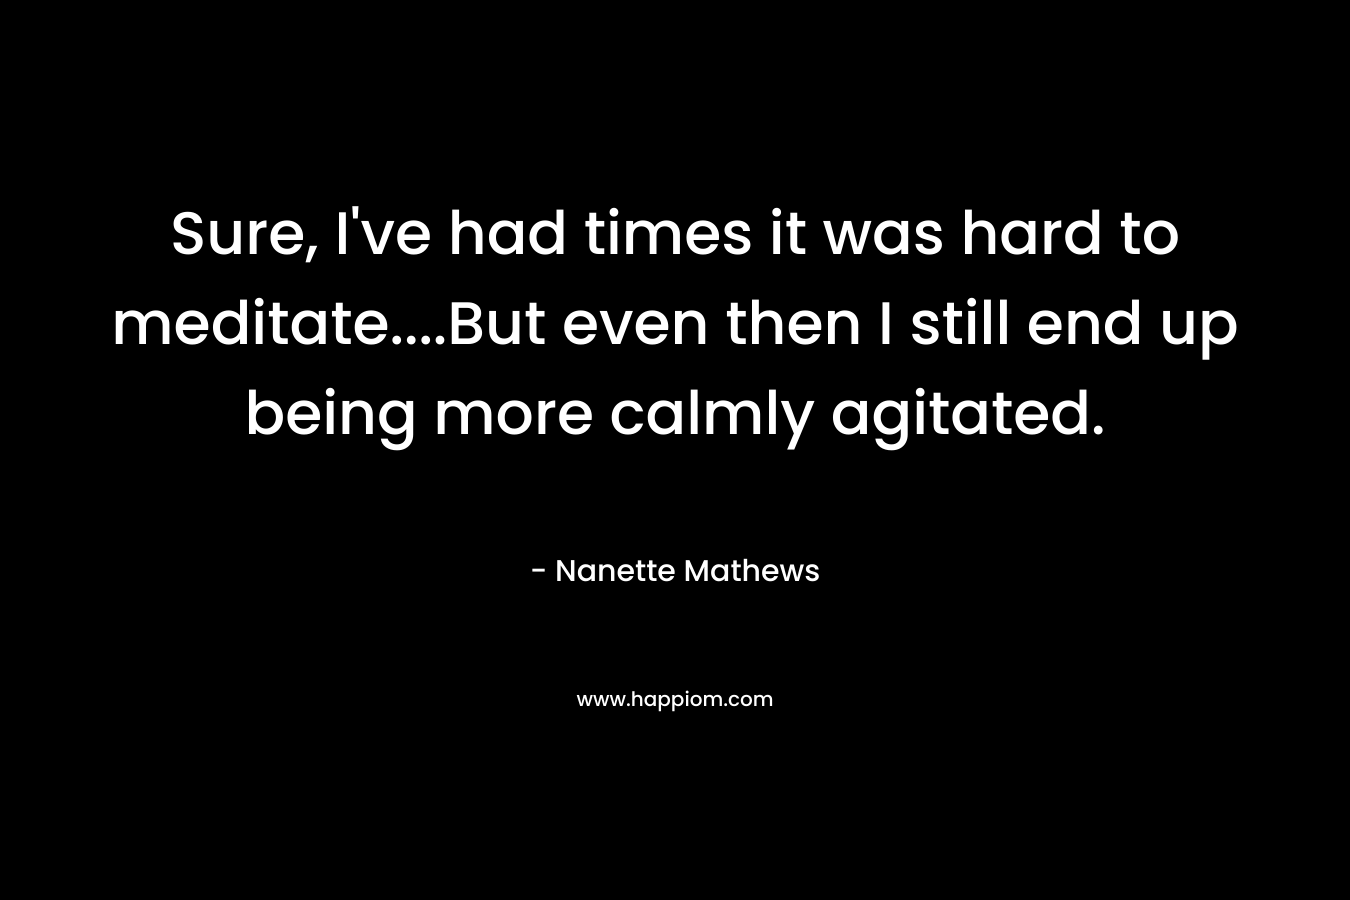 Sure, I've had times it was hard to meditate....But even then I still end up being more calmly agitated.